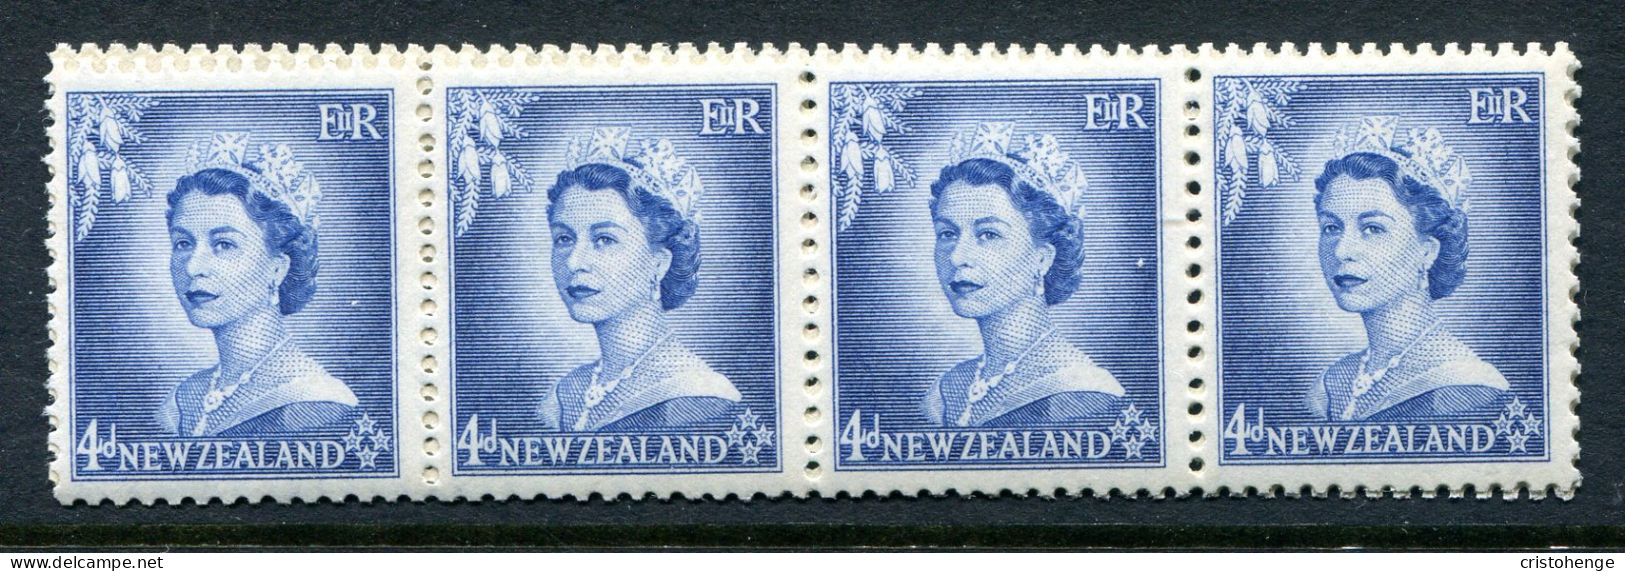 New Zealand 1953-59 QEII Definitives - Coil Strip - 4d Blue - Strip Of 16 MNH (SG Unlisted) - Unused Stamps